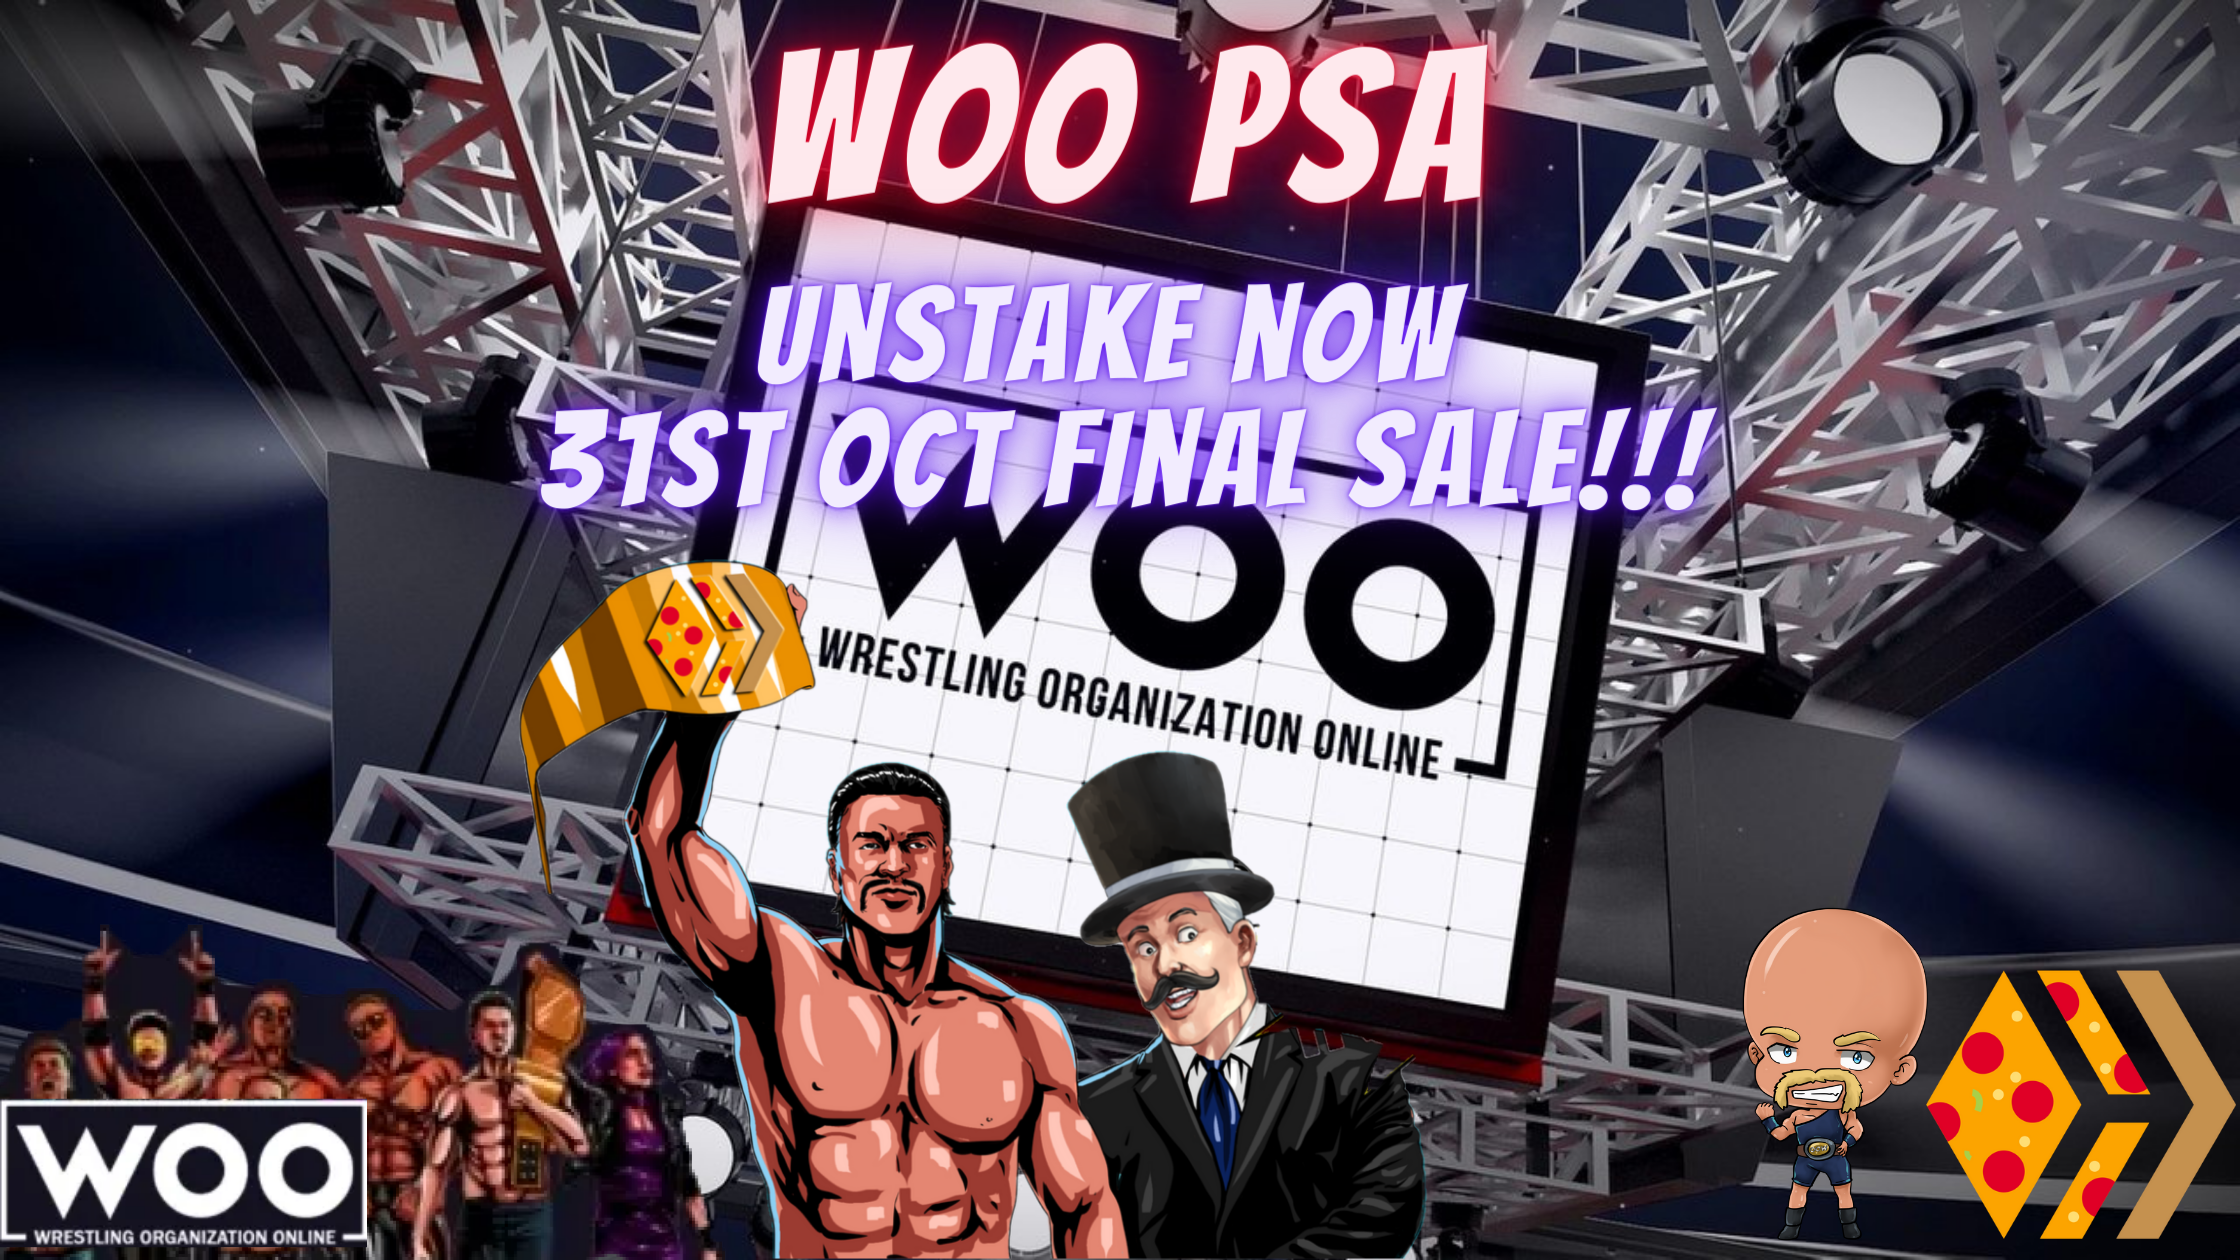 @blitzzzz/woo-psa-unstake-your-woo-now-31st-october-the-final-30k-general-sale